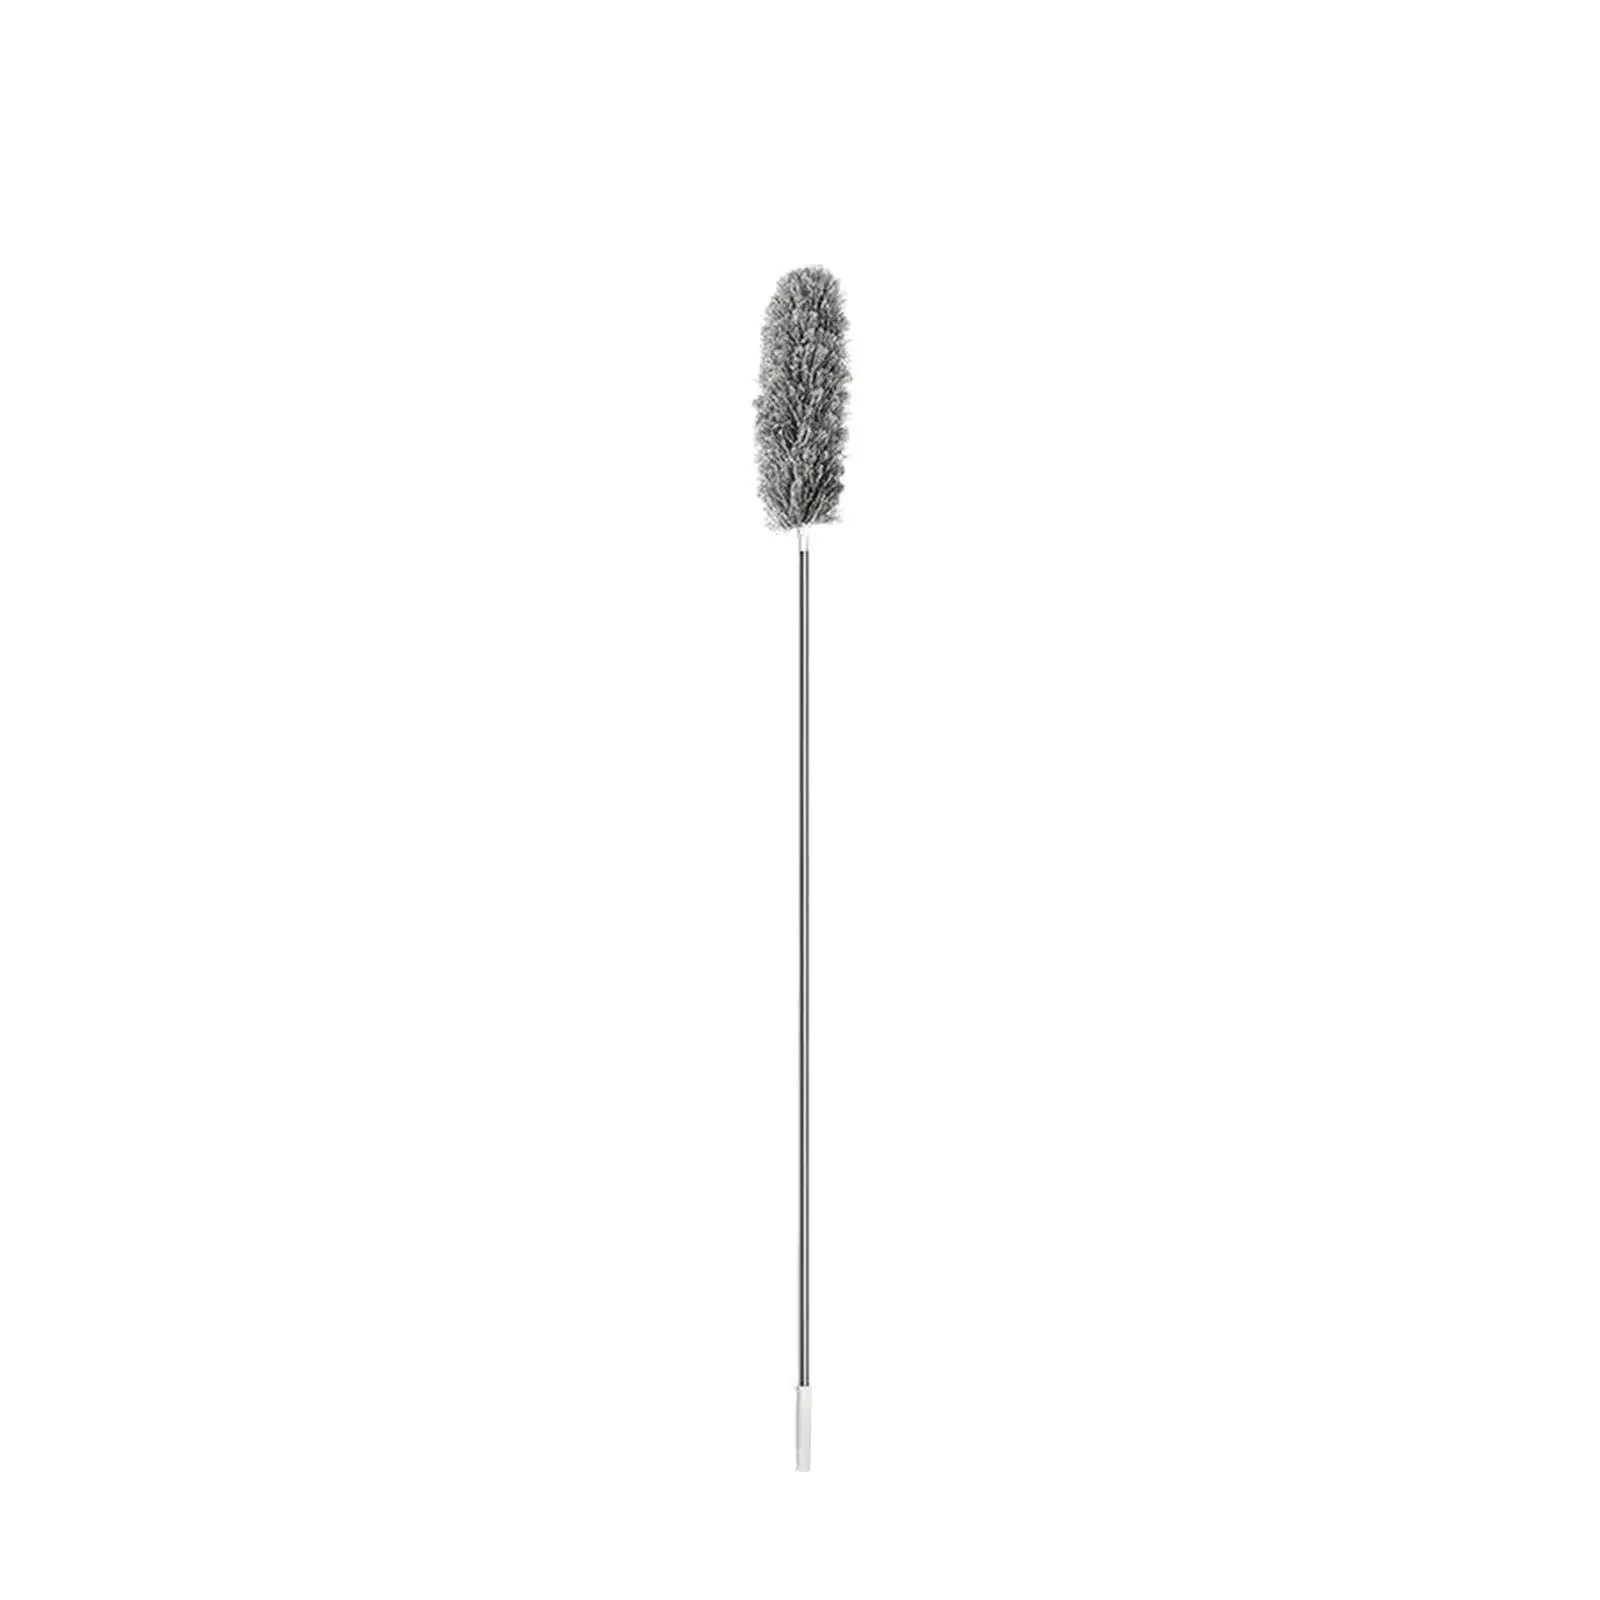 Long Broom Microfiber Duster Extendable 80 to 280cm Flexiable Head with Extension Pole 31inch to 110inch Convenient Washable